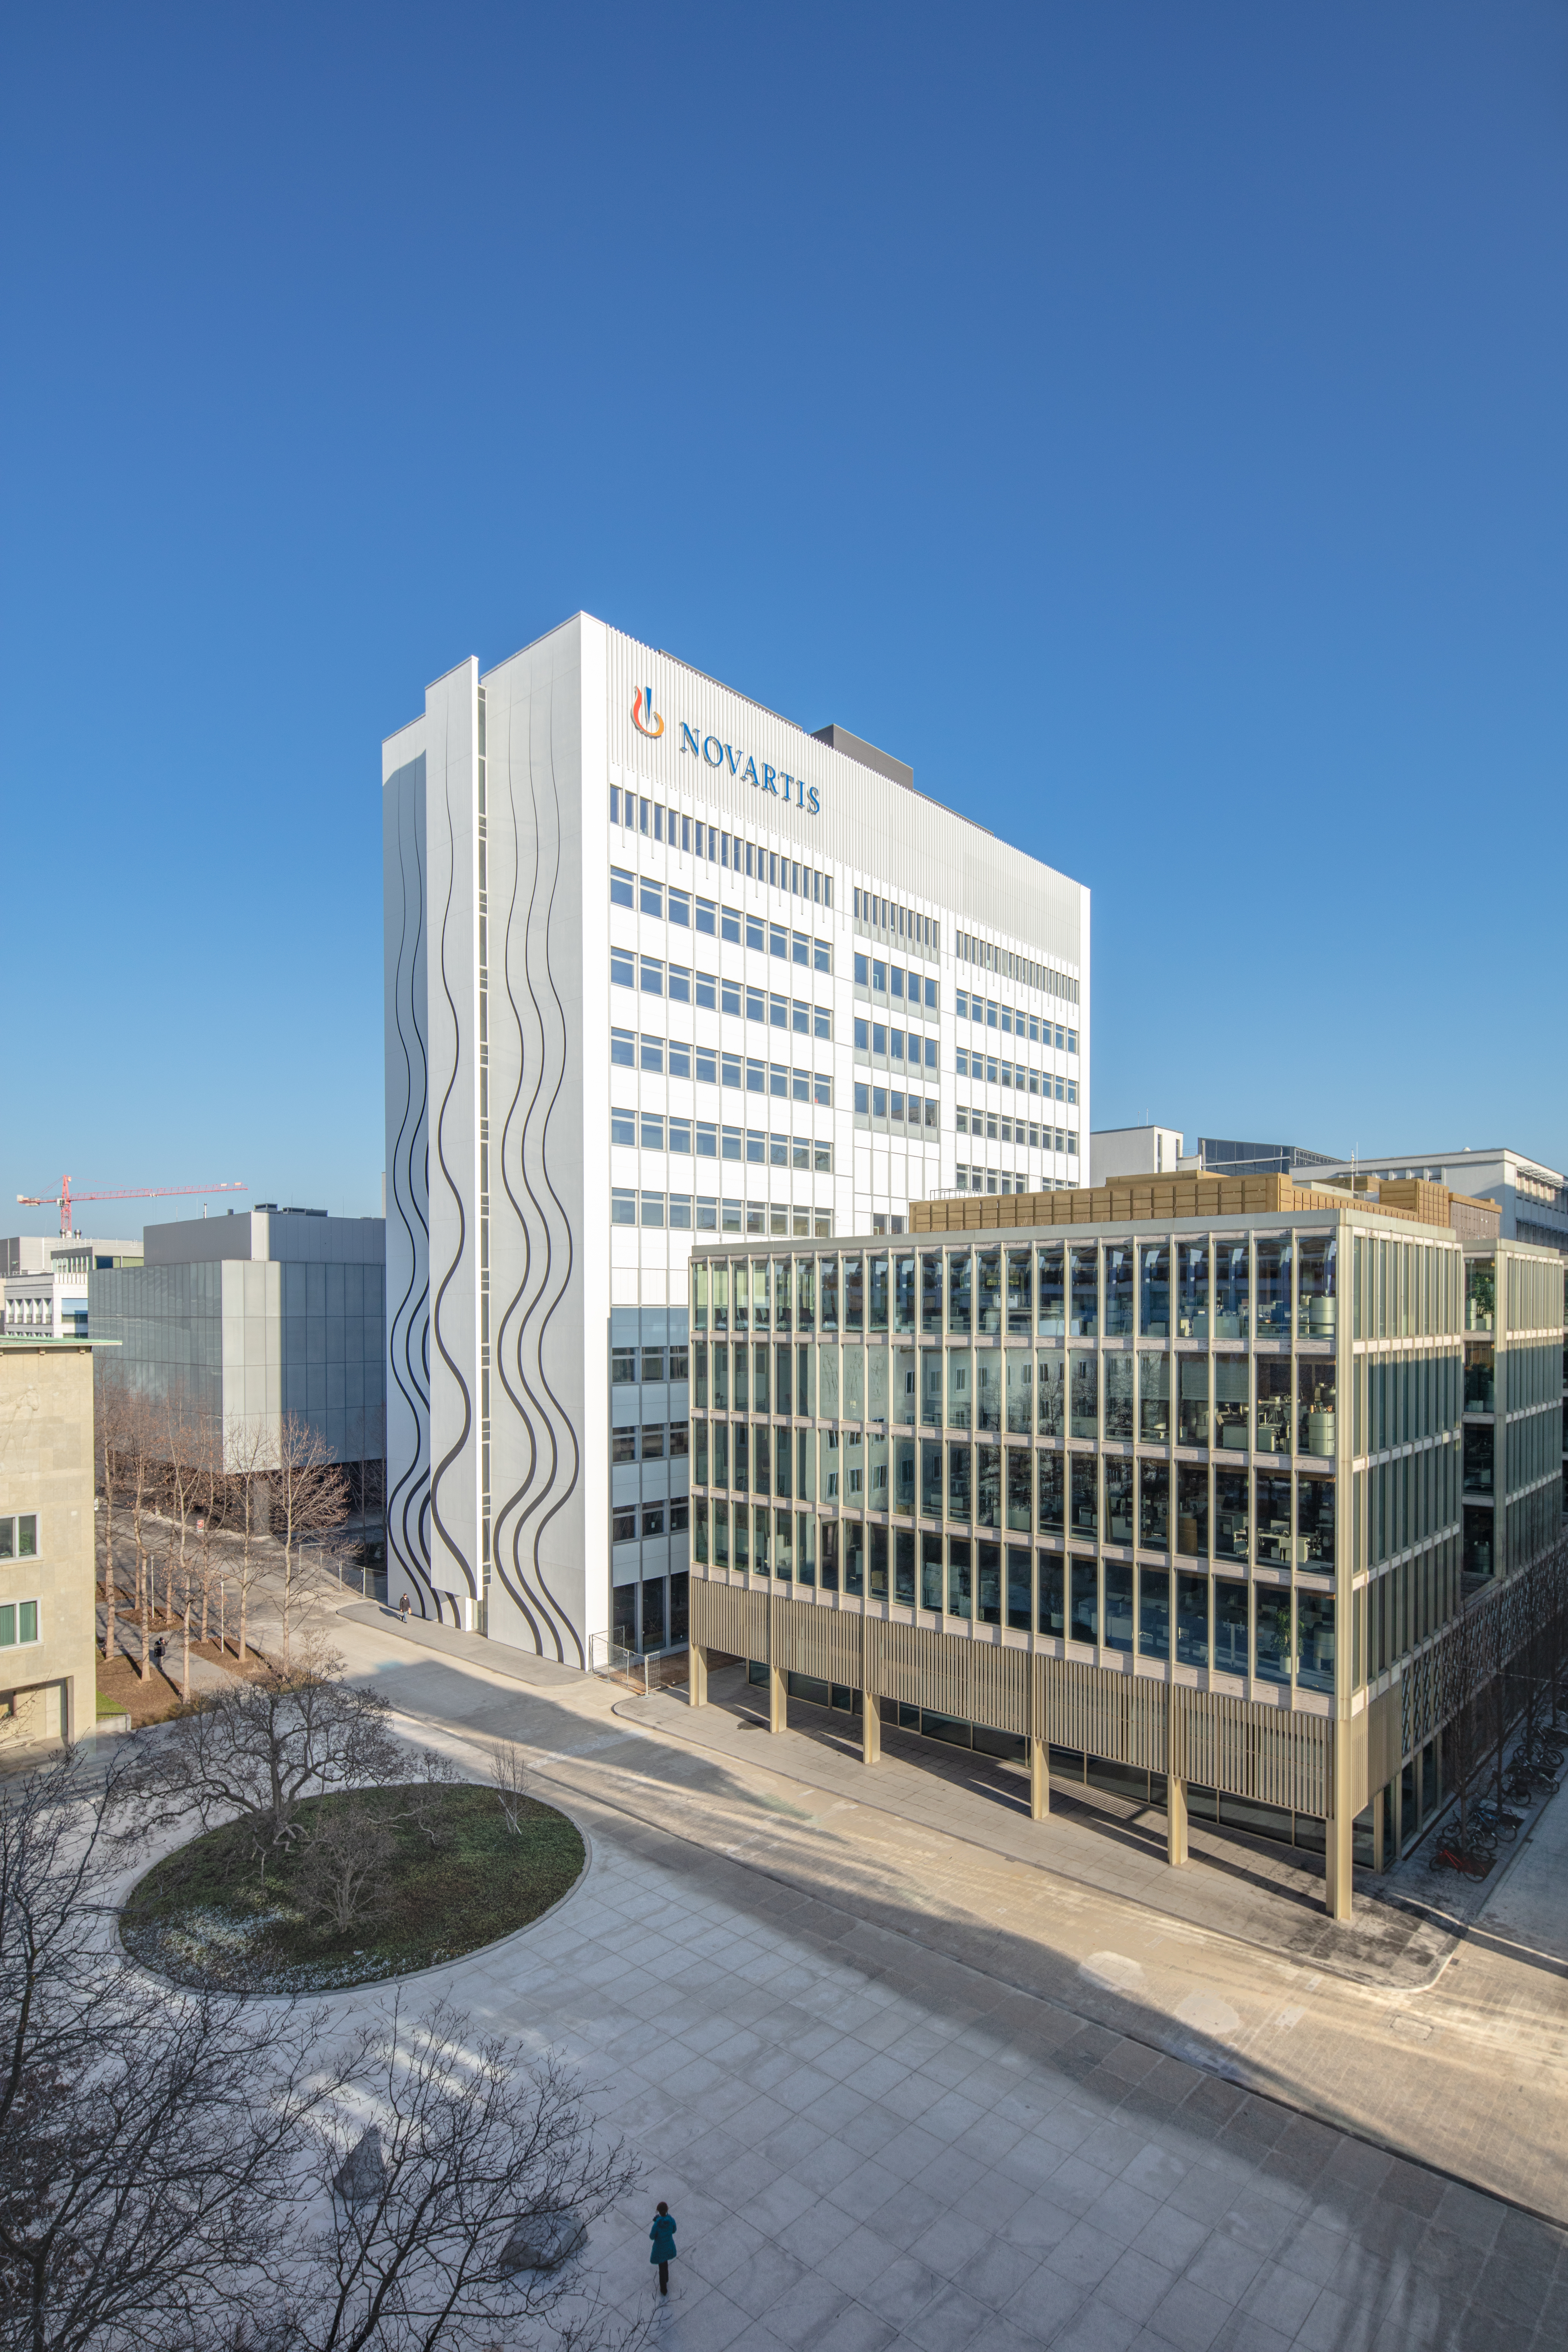 Banting 1 is a state-of-the-art laboratory and represents our drive to reimagine medicine.